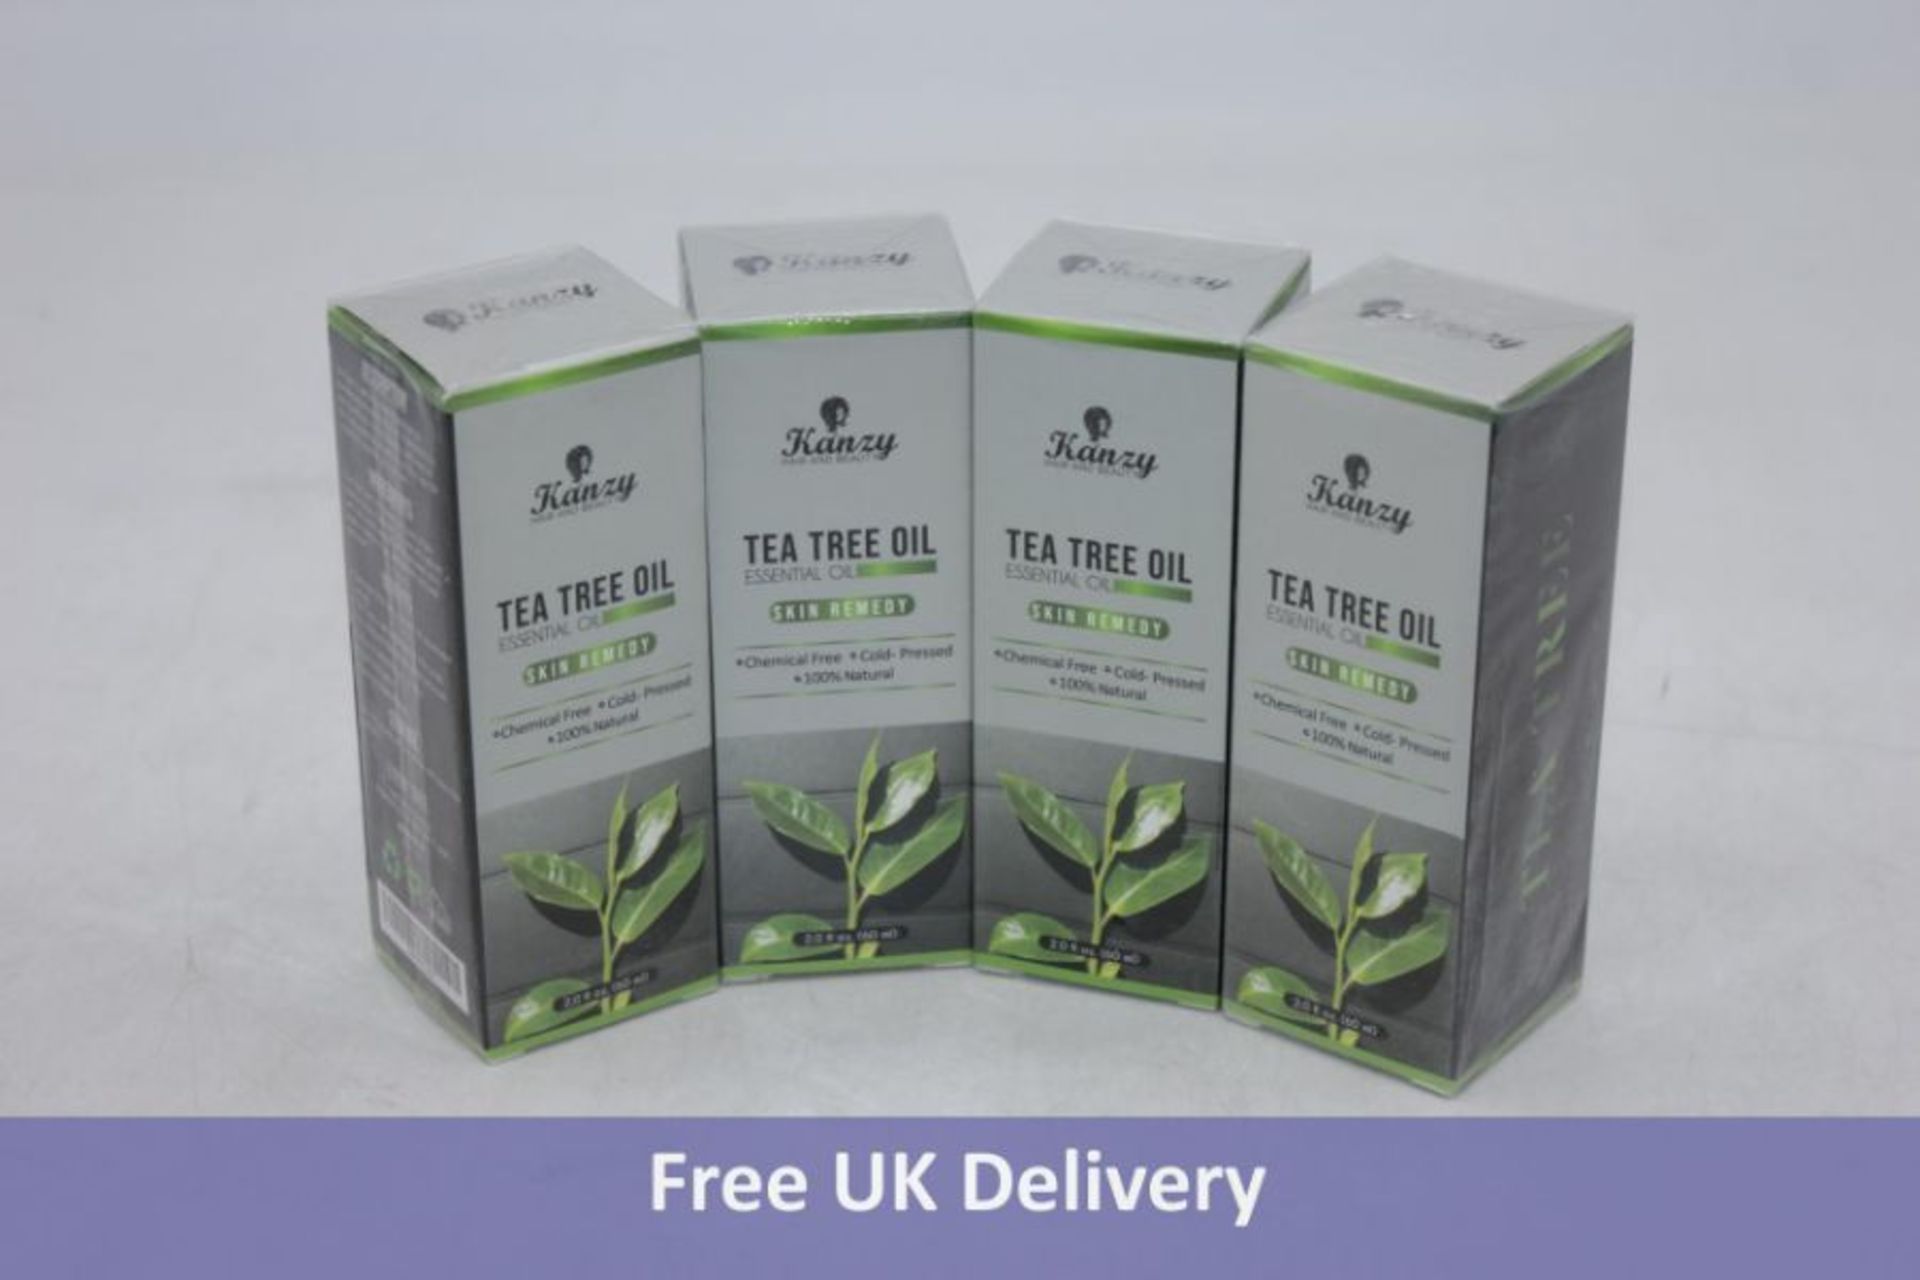 Twenty Bottles Kanzy Tea Tree Oil For Skin, Treatment For Hair, Face, Acne Blemishes And Nails, Natu - Image 2 of 2